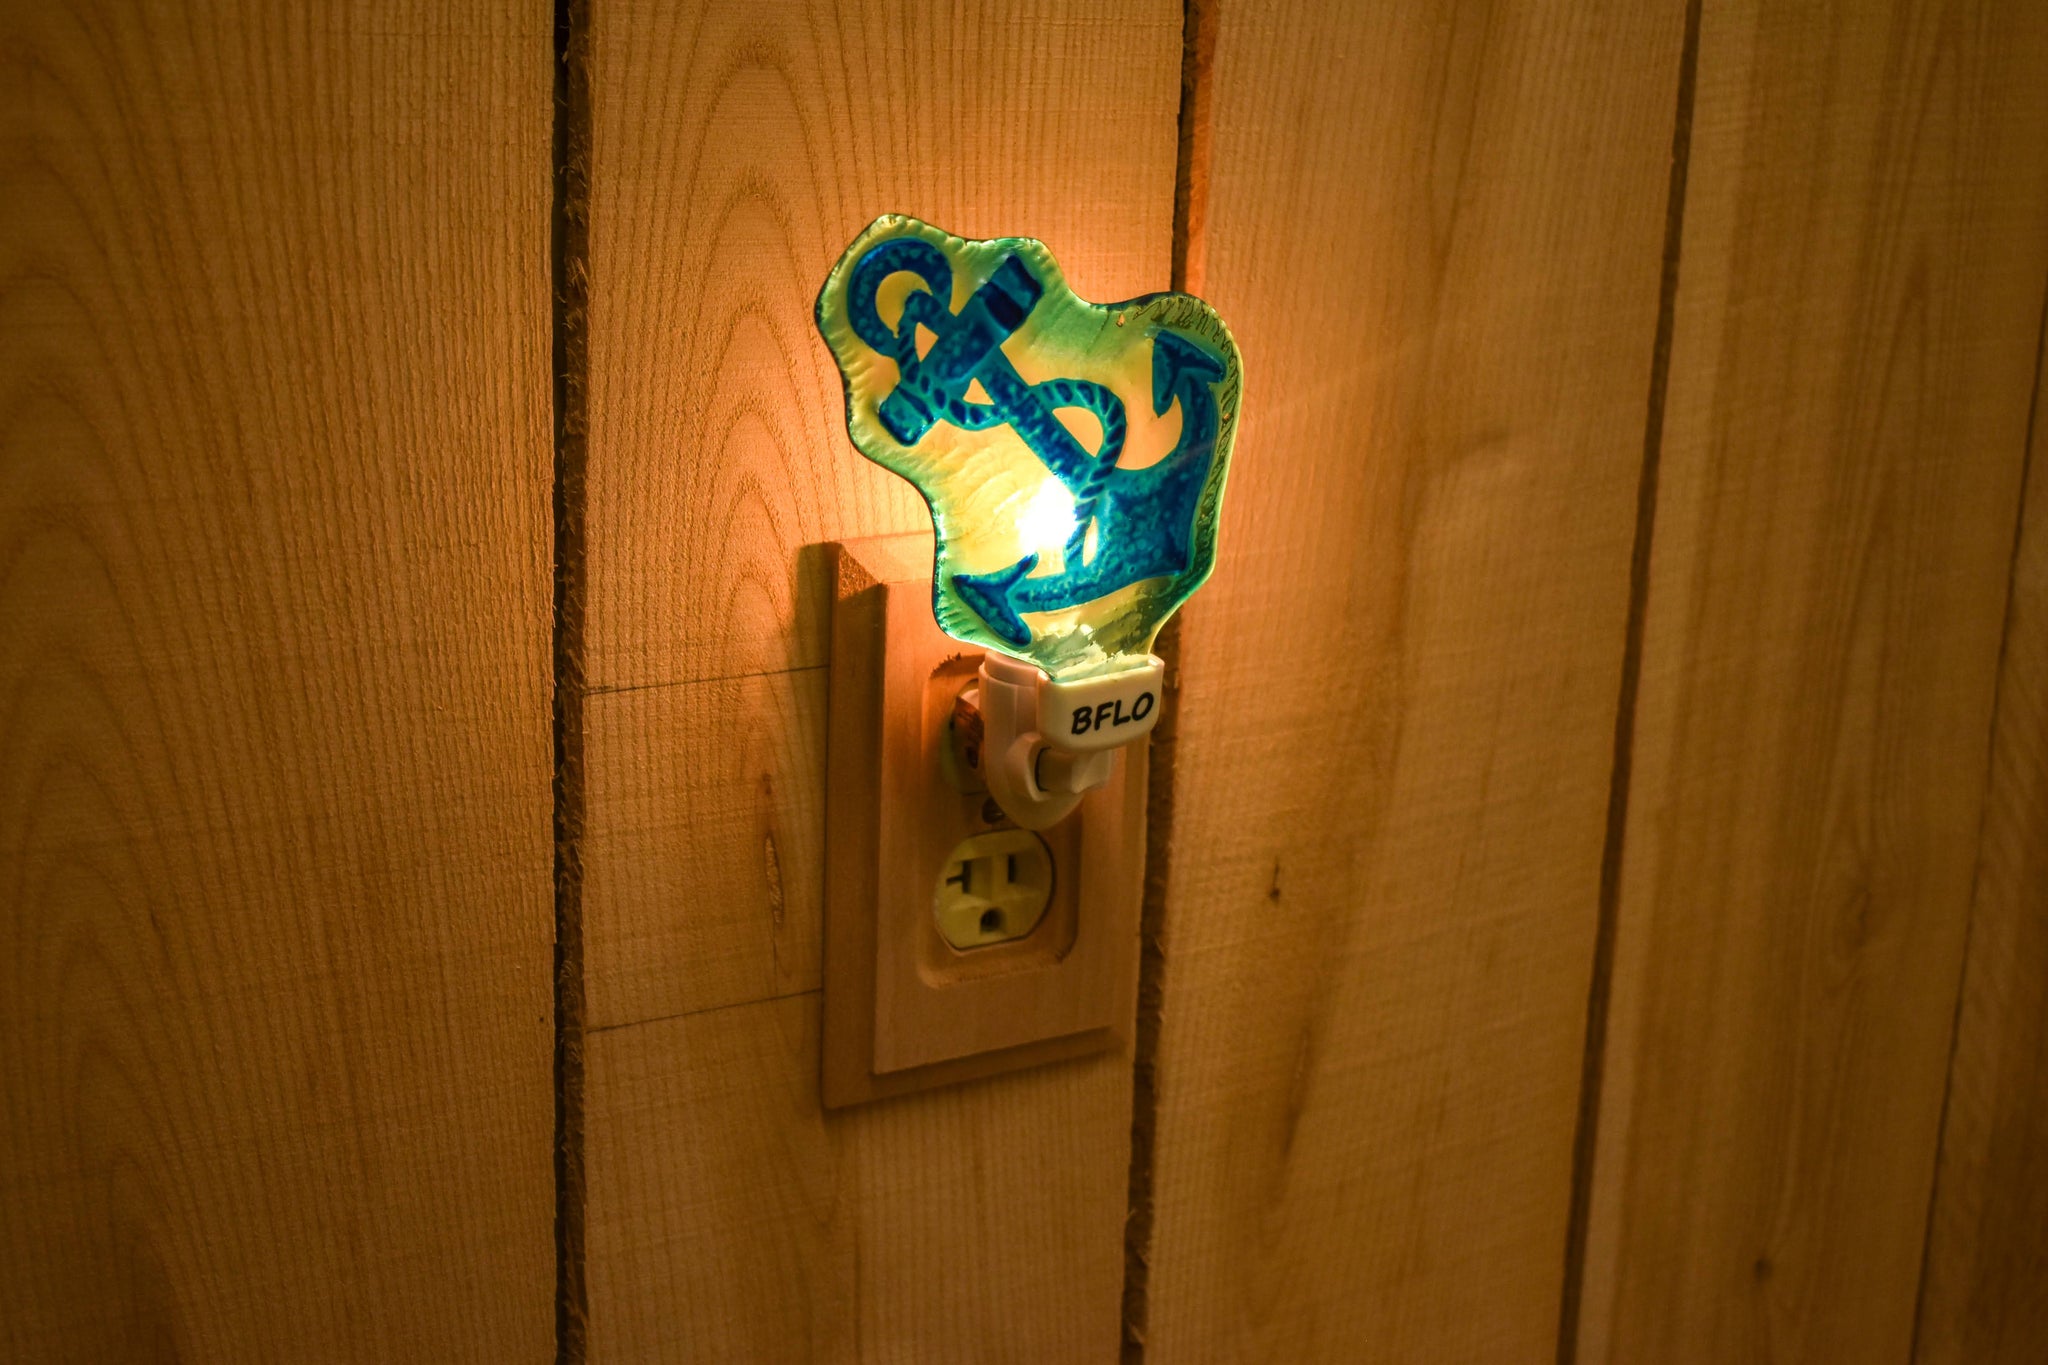 BFLO Hand Painted Glass Anchor Night Light